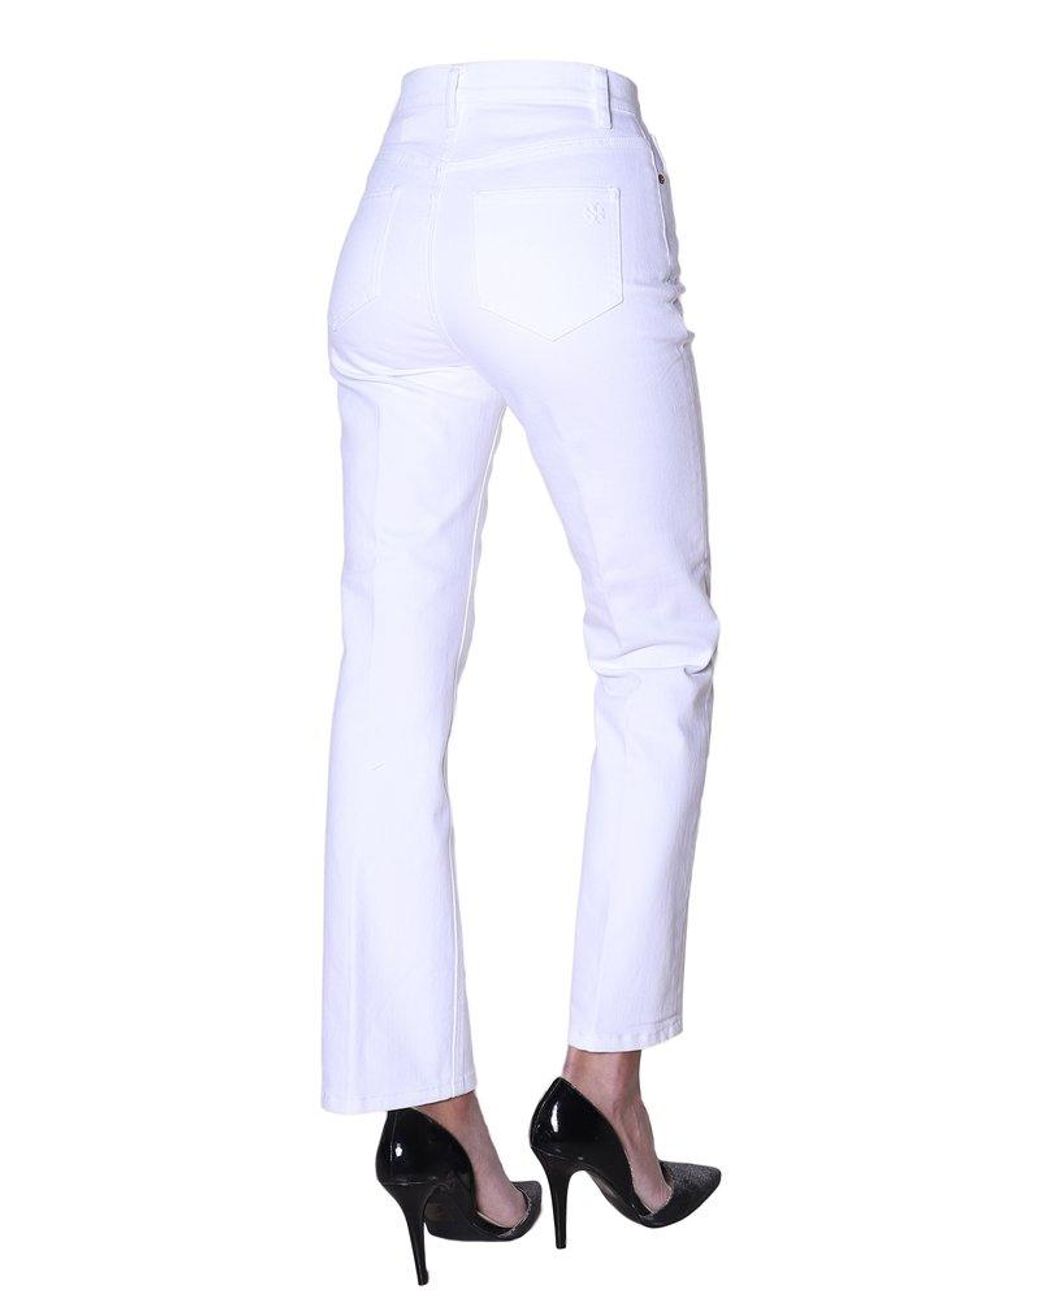 Tory Burch Button-fly Jeans in White | Lyst